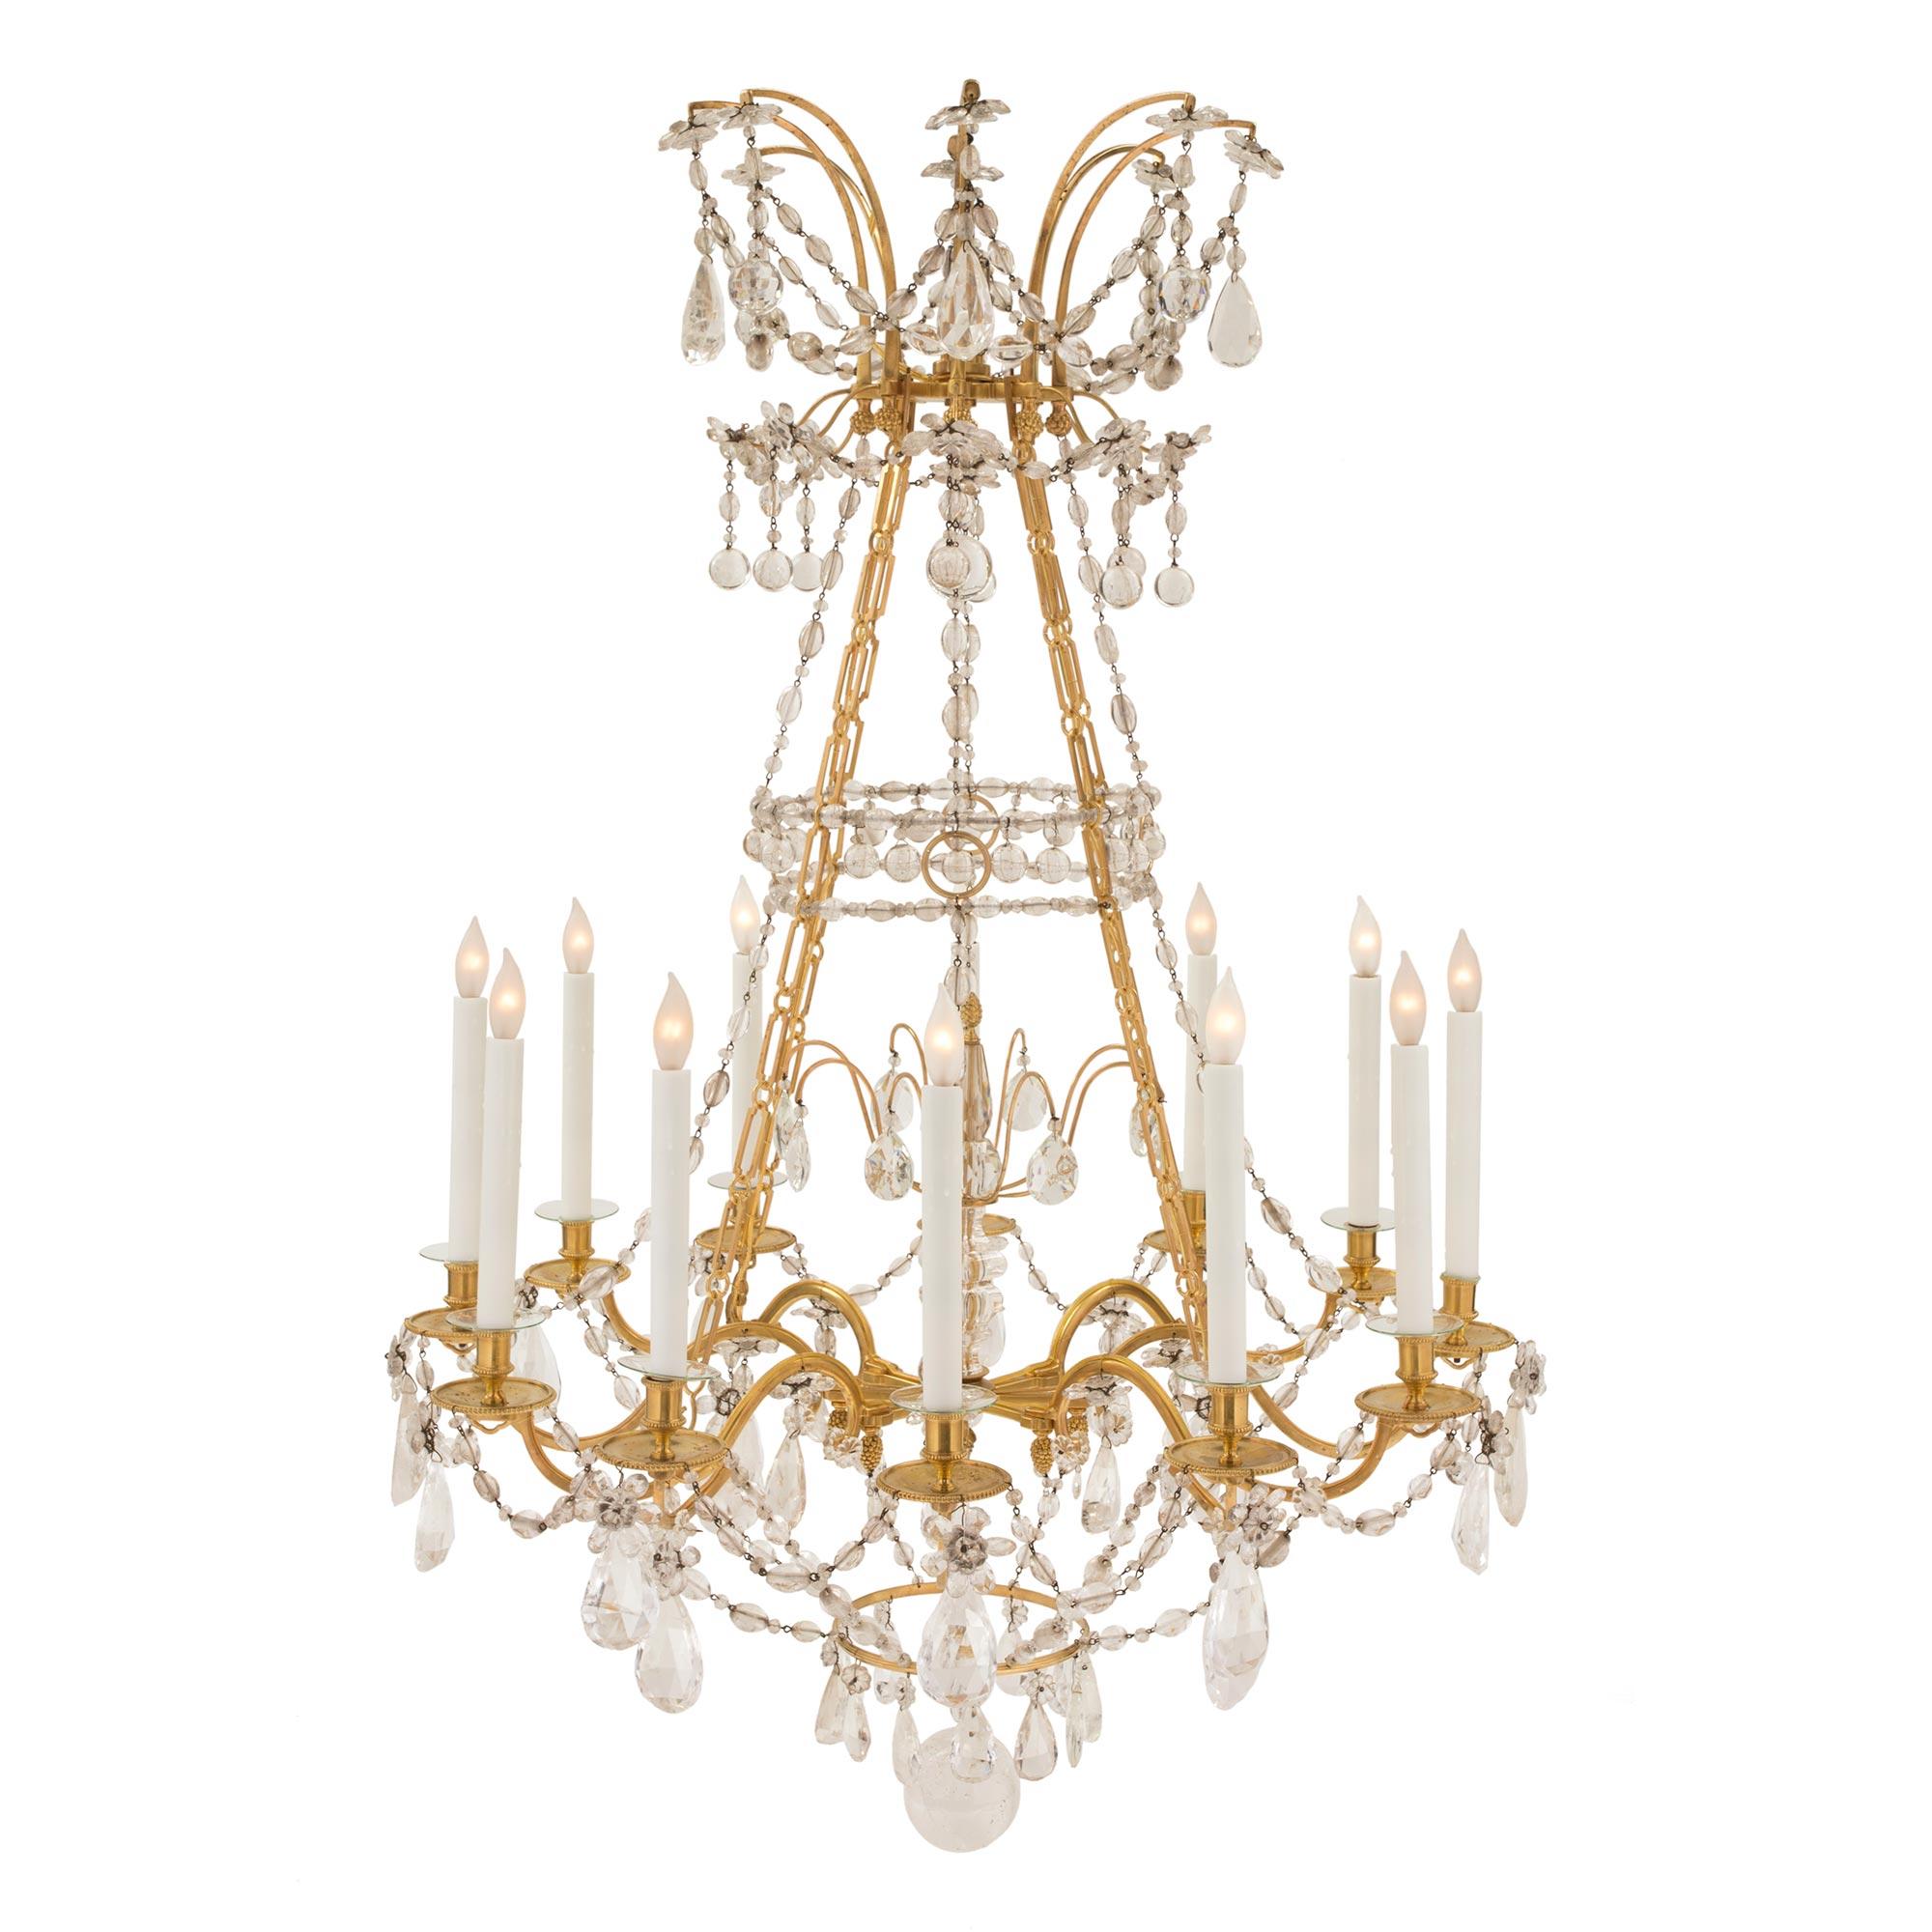 A stunning French mid 19th century Louis XVI st. ormolu, Baccarat crystal and rock crystal twelve arm chandelier. The chandelier is centered by a striking solid rock crystal bottom ball amidst beautifully cut Baccarat crystal pendants. Above the